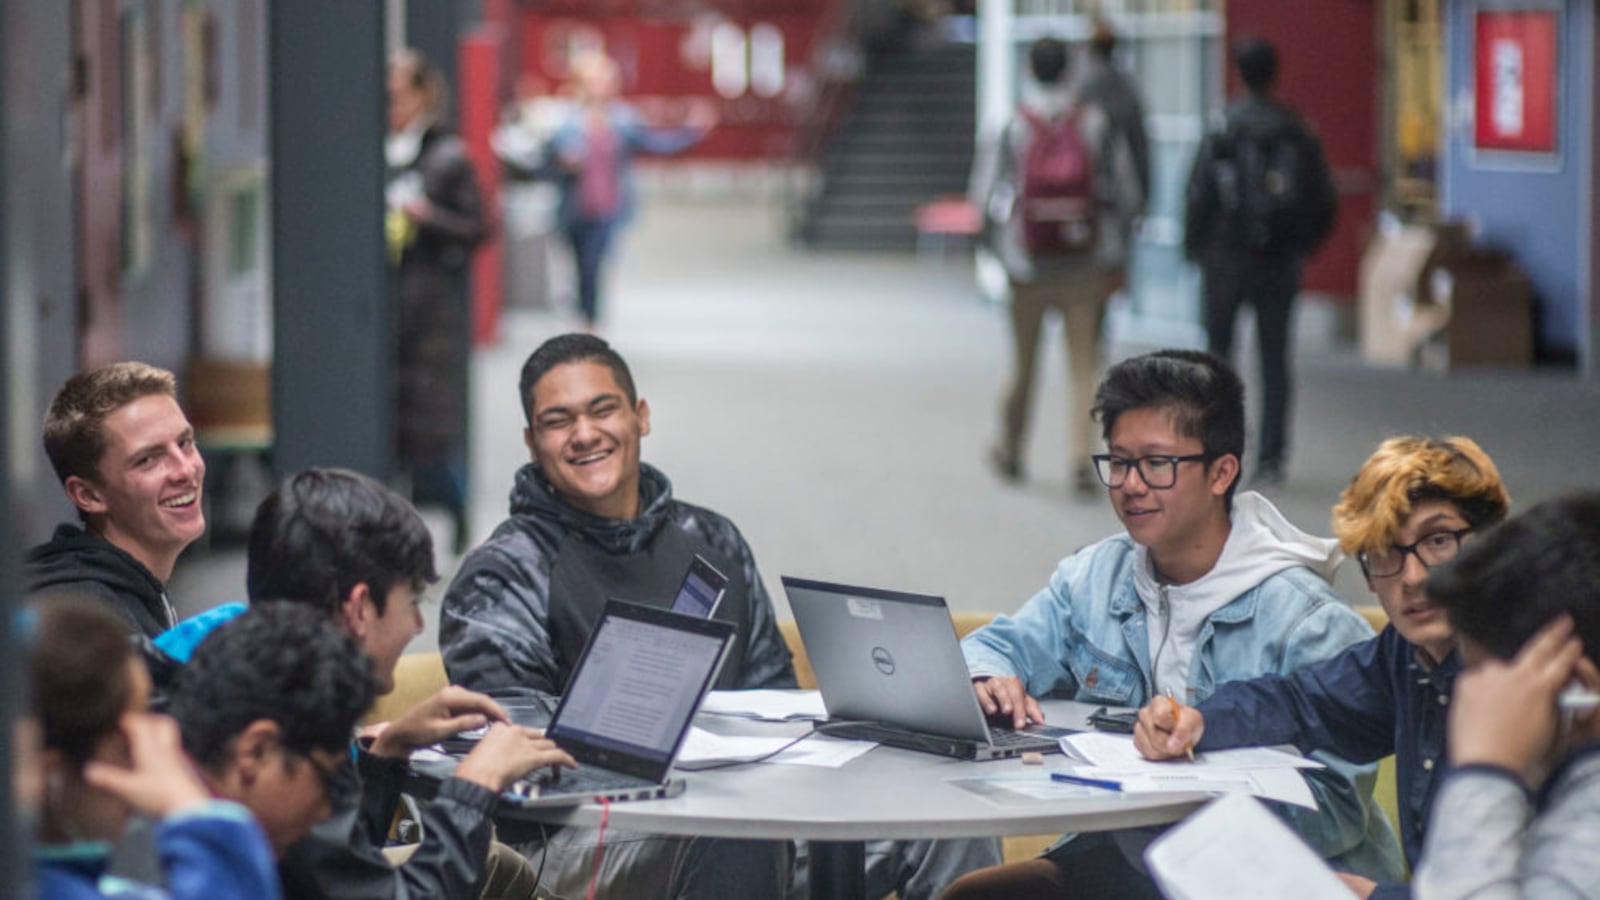 A group of students in hoodies work around a table in a hallway or common area of DSST: Montview in 2017. They appear to be mostly boys and they’re smiling and laughing. Several laptops are open on the table.